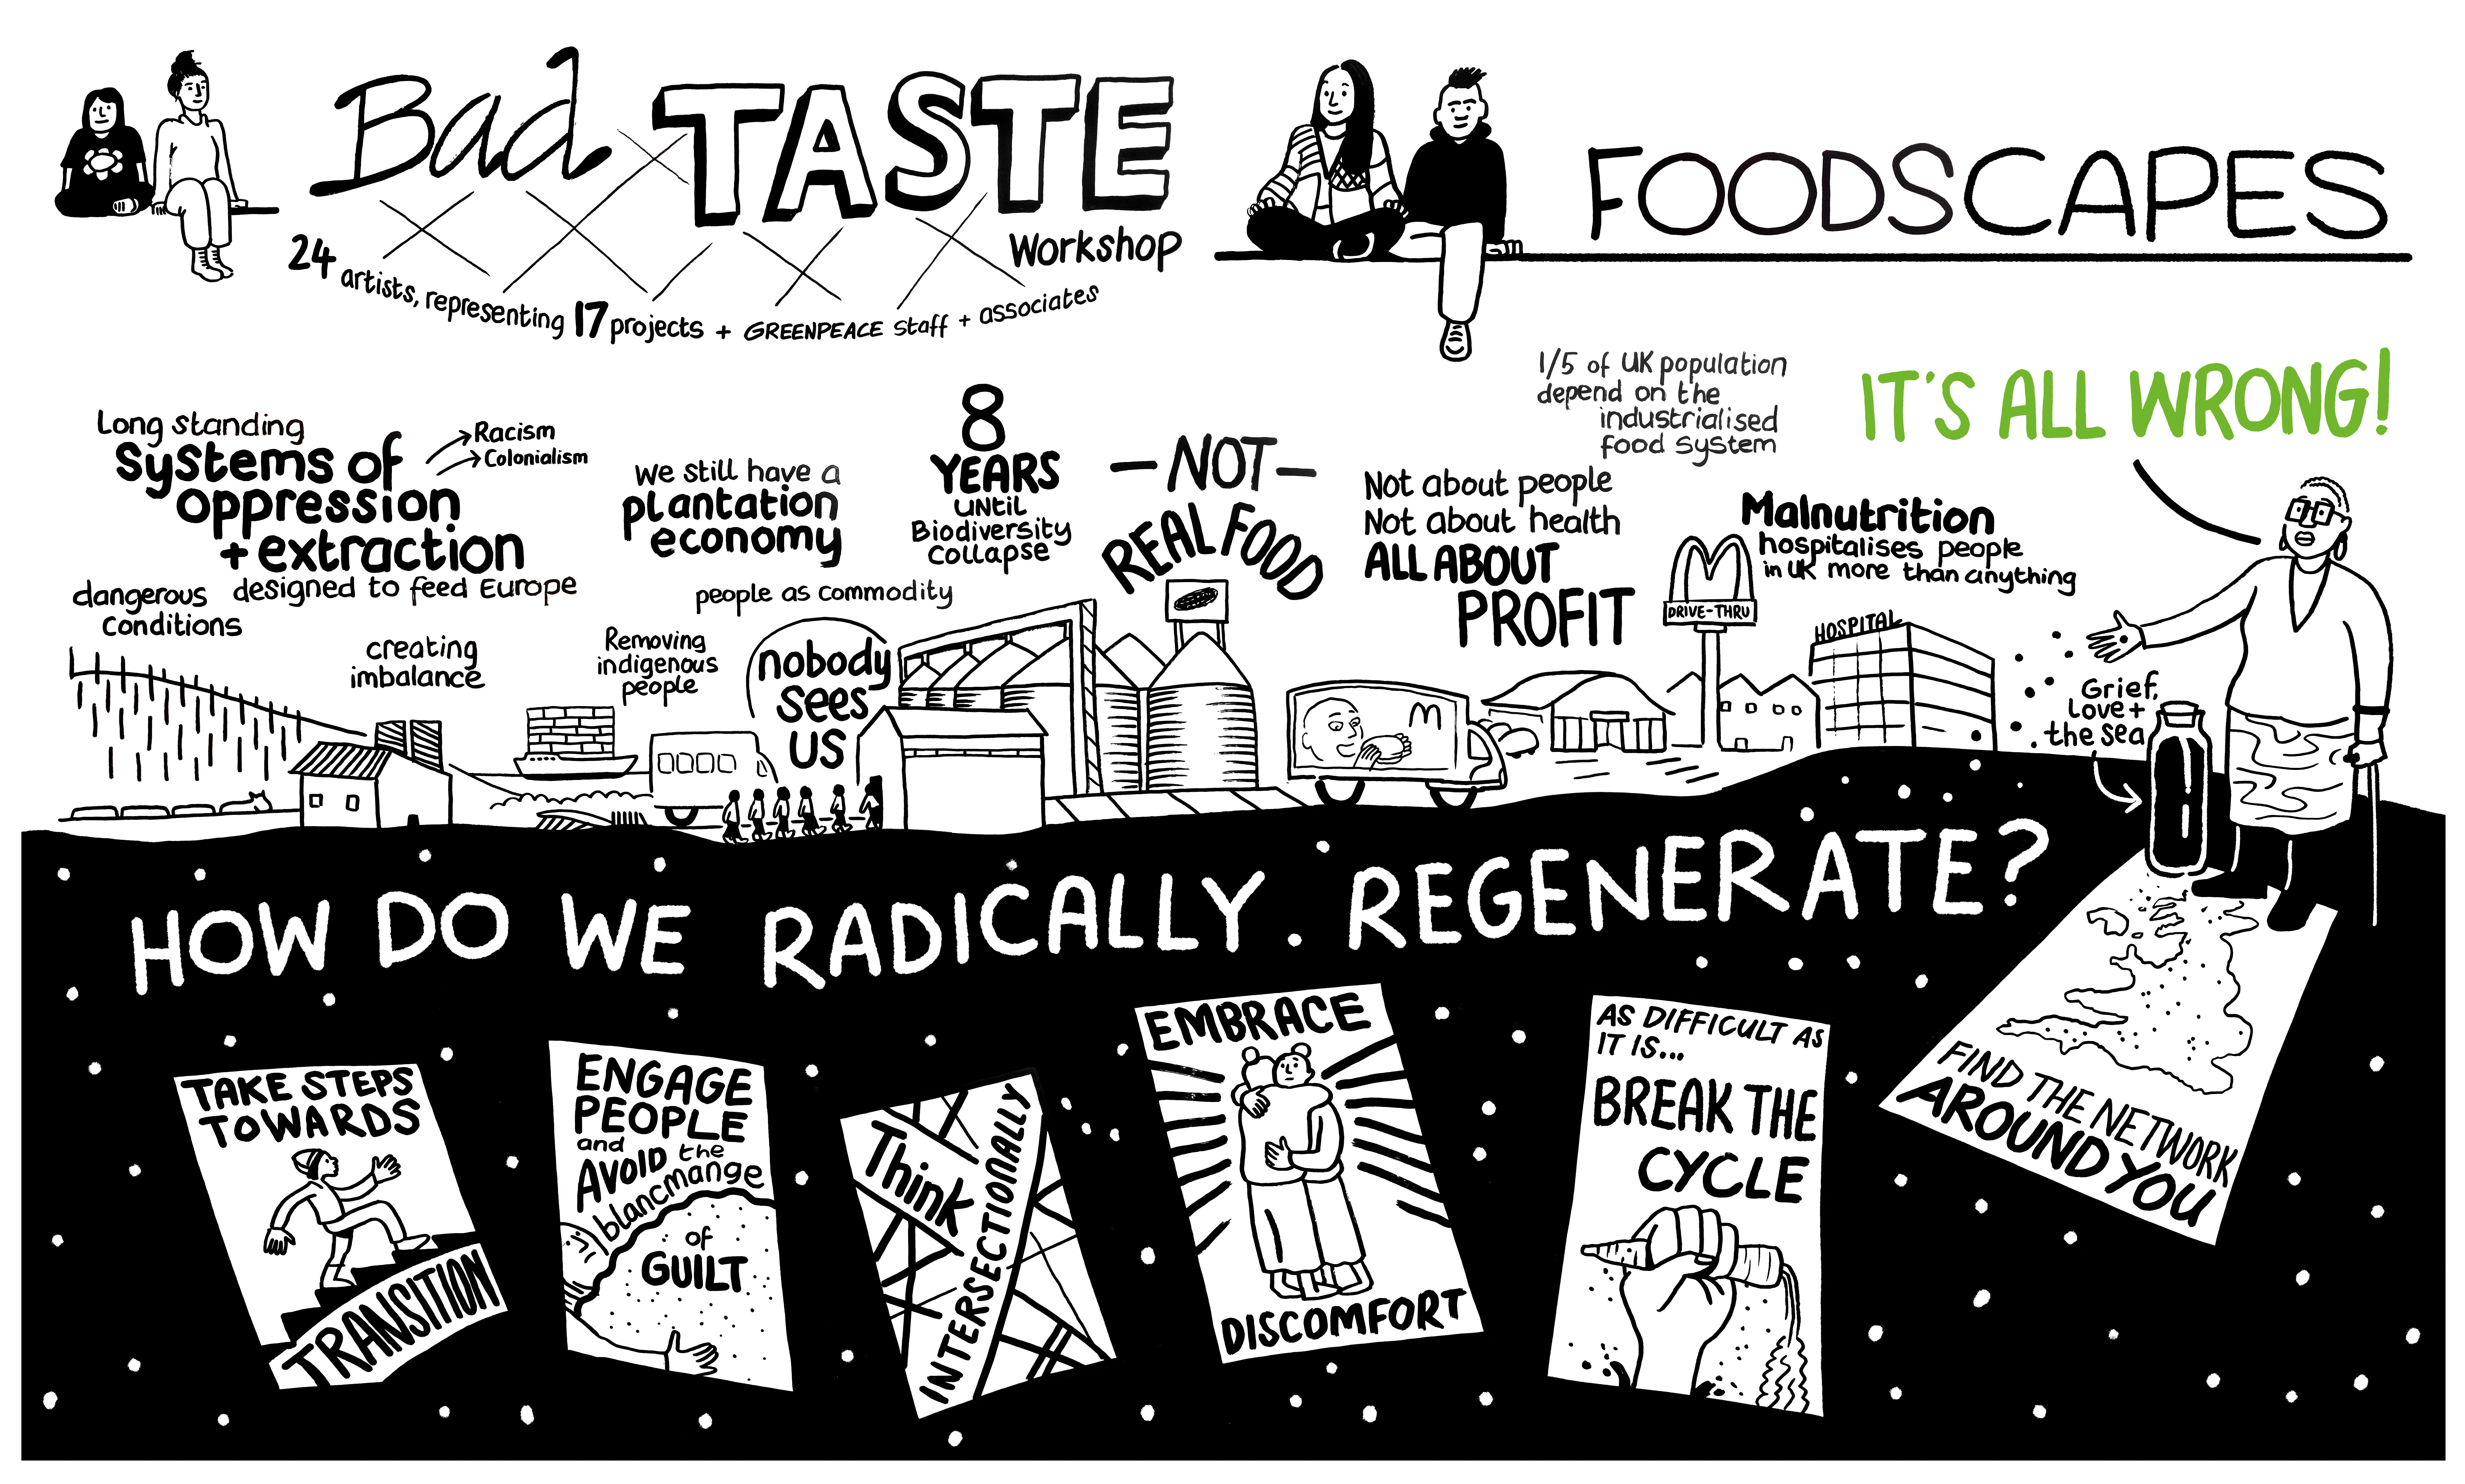 Graphic sketchnote of key talking points. The image splits roughly in two section: 'It's all wrong!' and 'How do we radically regenerate?'. Under the 'wrong' section are ideas like: malnutrition, imbalance, dangerous conditions, dependence on industrialised food system, long-standing oppression, all about profit, and 8 years until biodiversity collapse. Under 'regenerate' section, are ideas like: find nearby networks, think intersectionally, take steps to transition, engage people and avoid guilt, and embrace discomfort as it's hard to break the cycle.